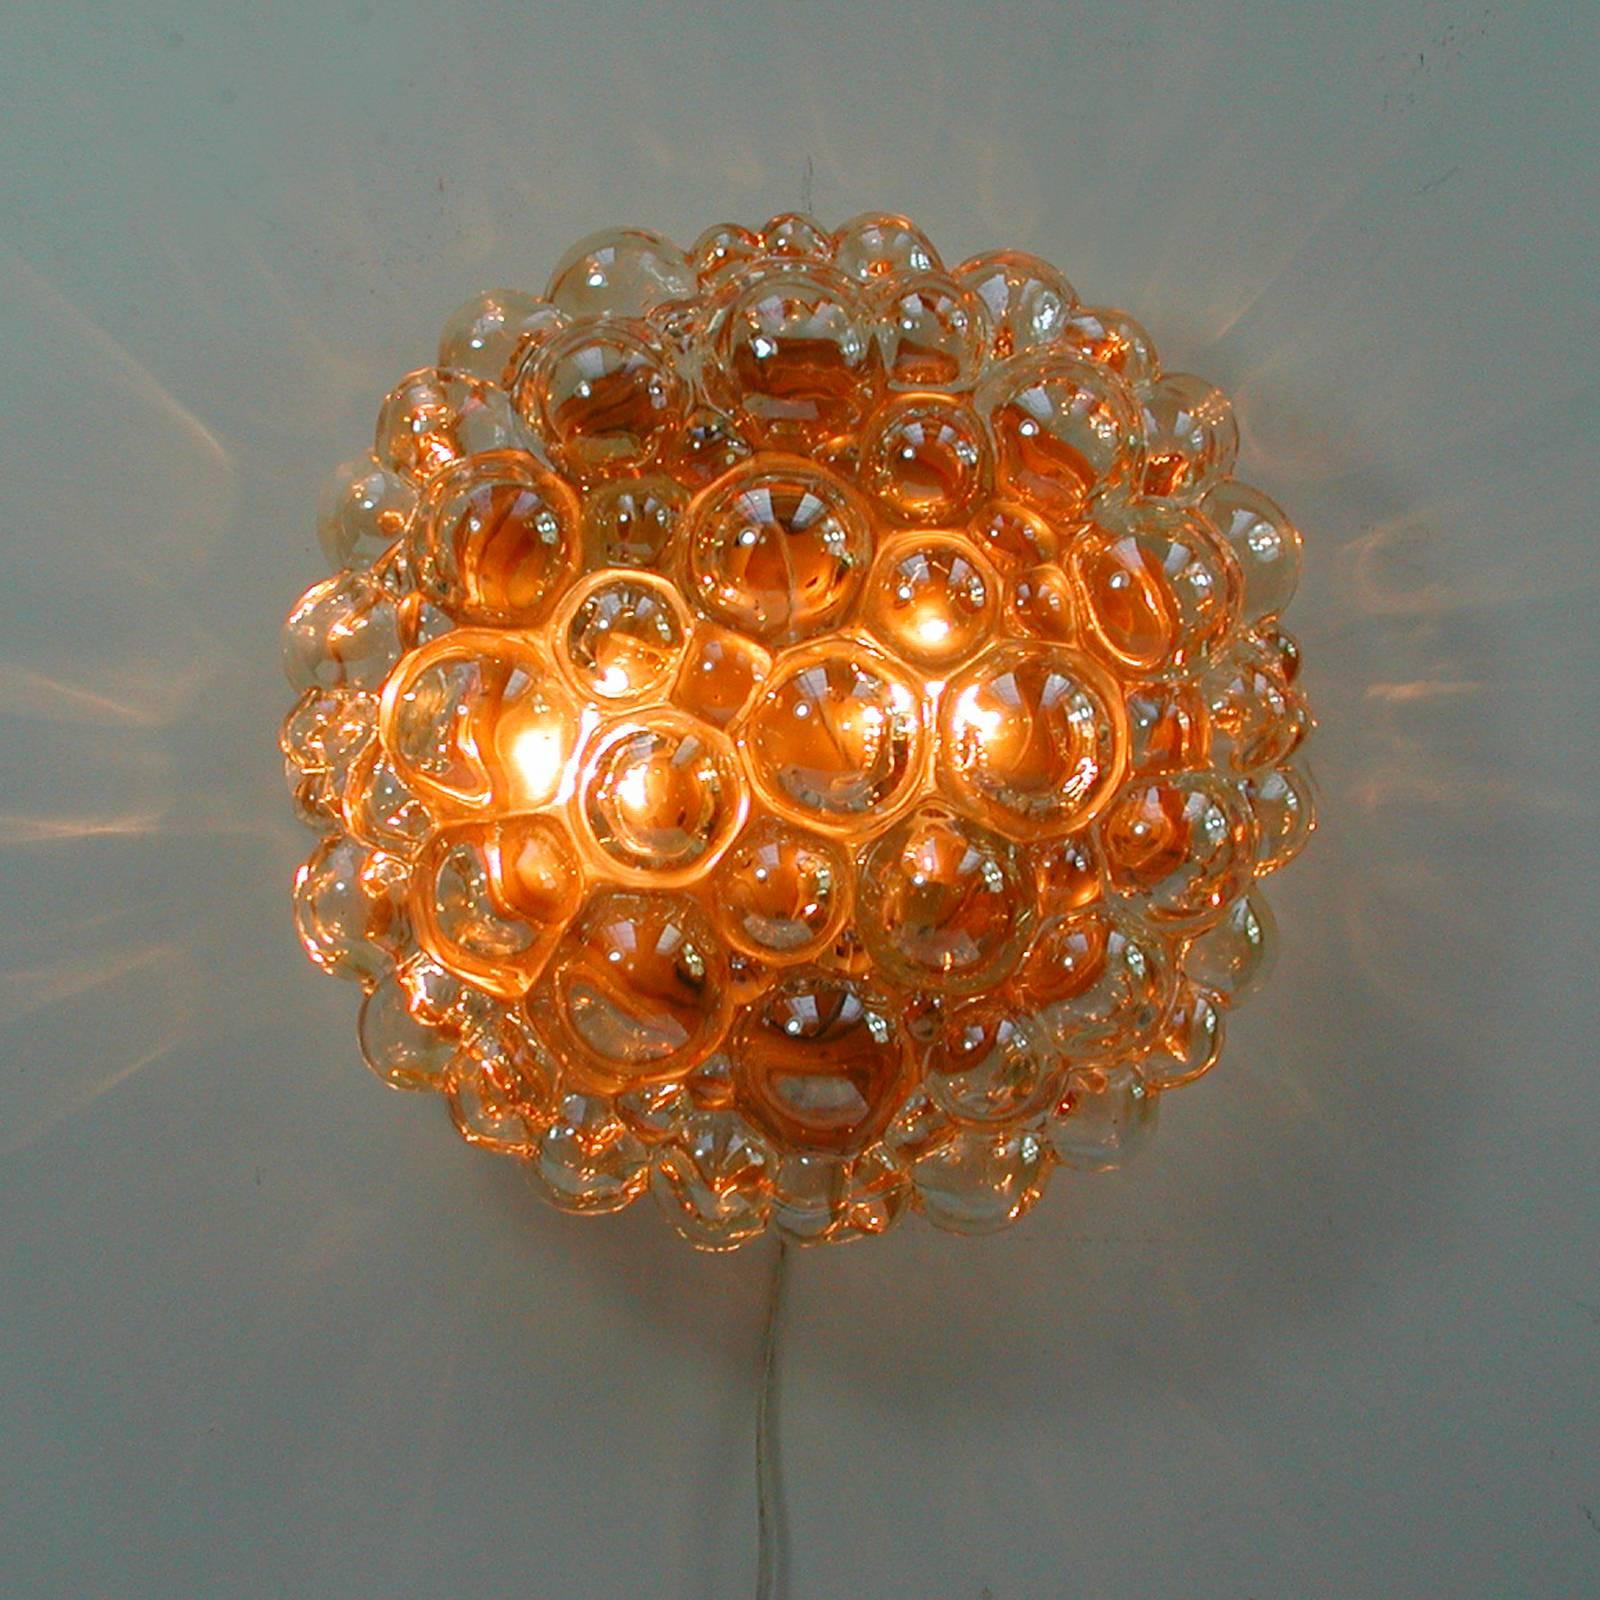 Beautiful large bubble sconce or wall light or flush mount by Helena Tynell for Glashütte Limburg, Germany, 1960s.
Made of glossy amber colored glass with a gilt colored base.